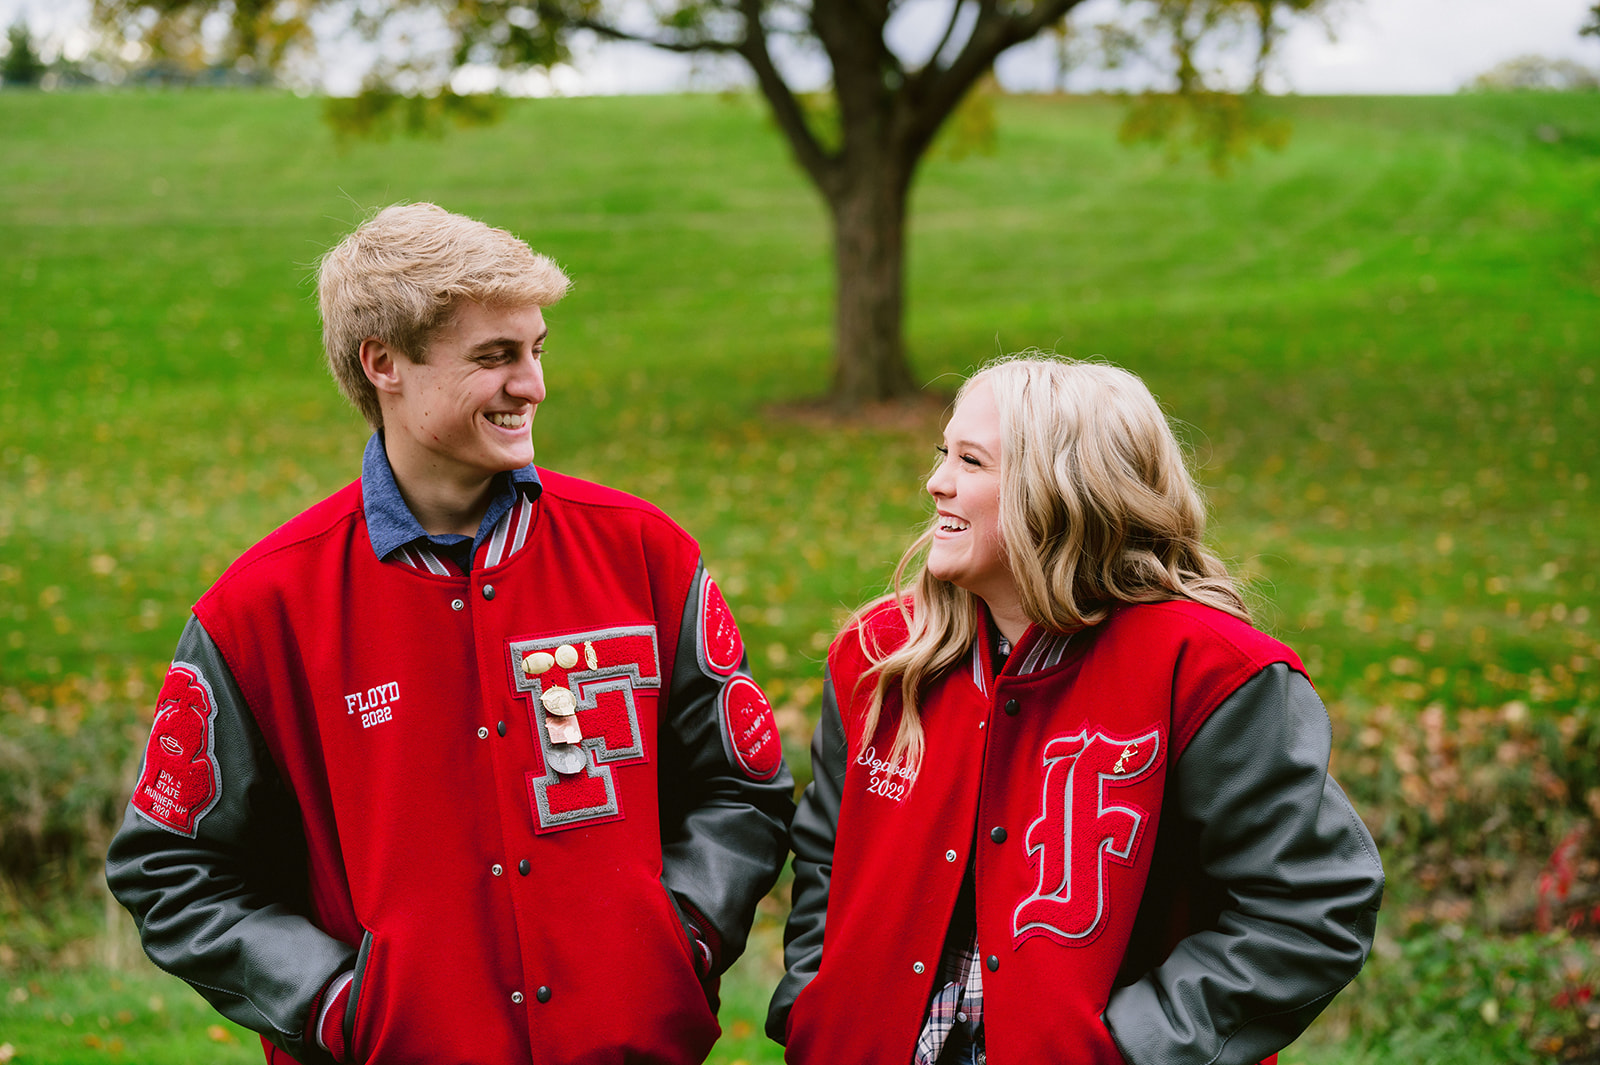 Senior Picture Outfit Ideas: Guy and girl looking and smiling at each other while wearing matching Letterman jackets.